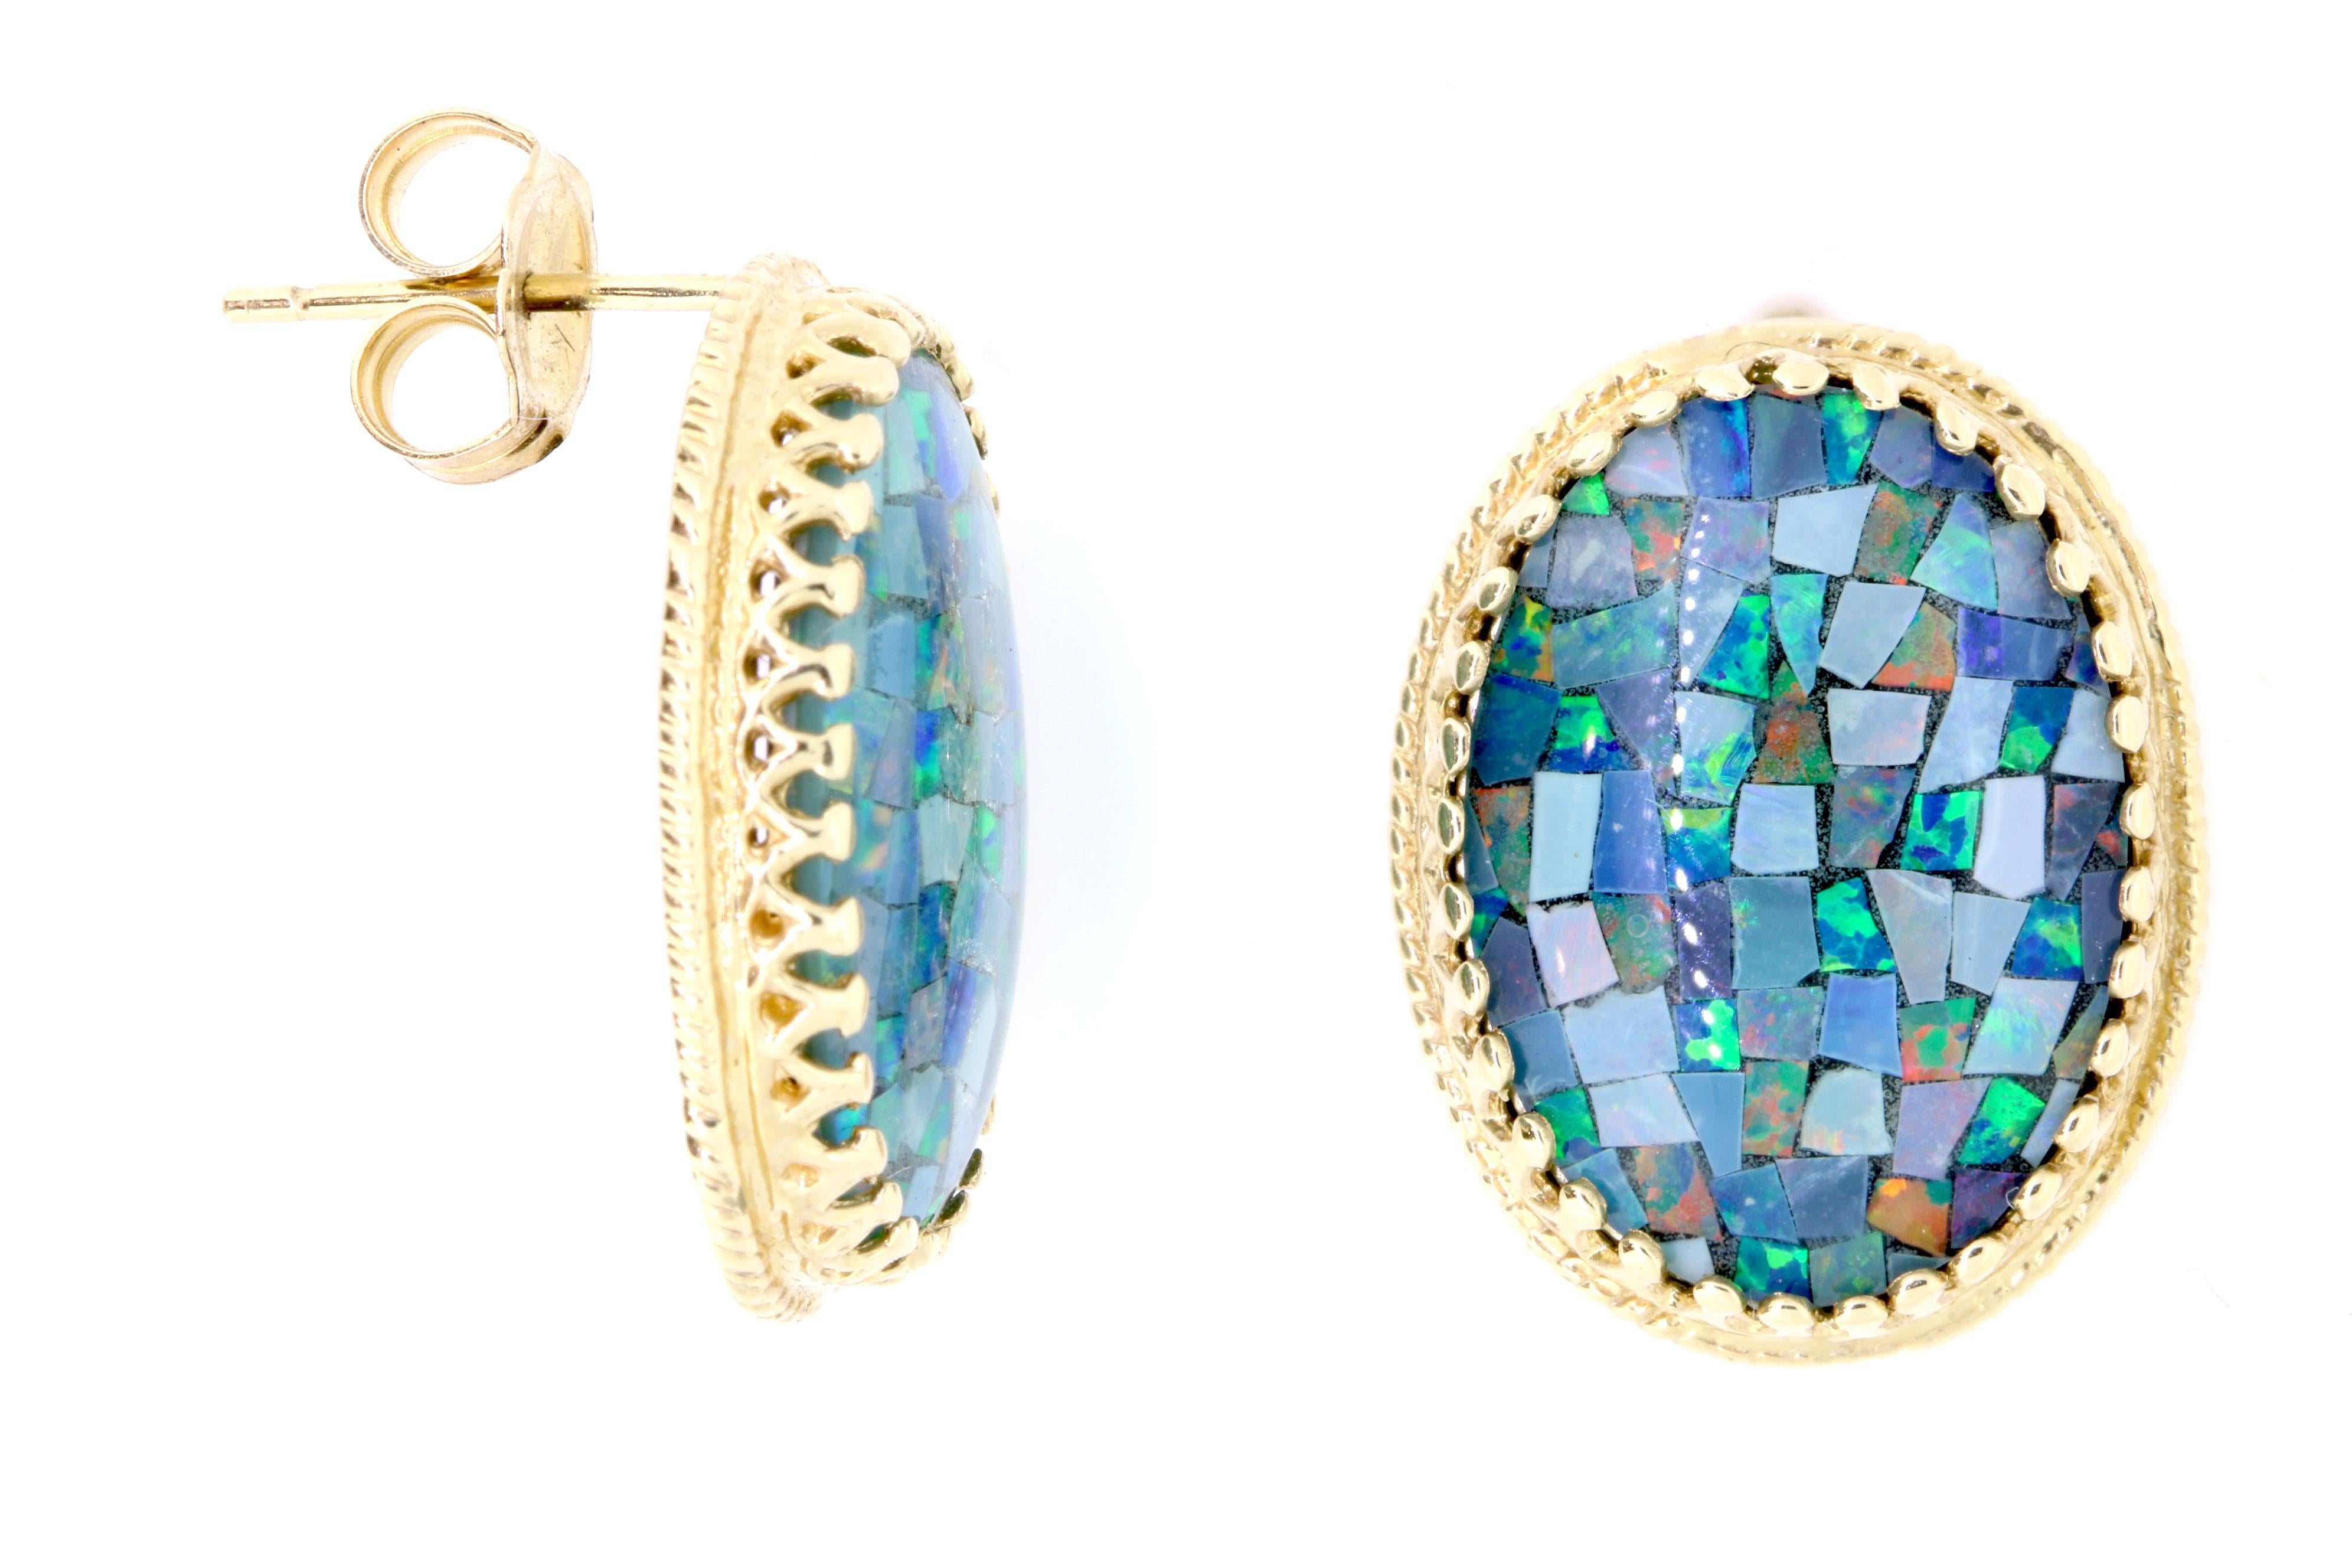 Material: 14K Yellow Gold 
Stone Details: 2 Oval Opals at 11.9 Carats

Fine one-of-a-kind craftsmanship meets incredible quality in this breathtaking piece of jewelry.

All Alberto pieces are made in the U.S.A. and come with a lifetime warranty!